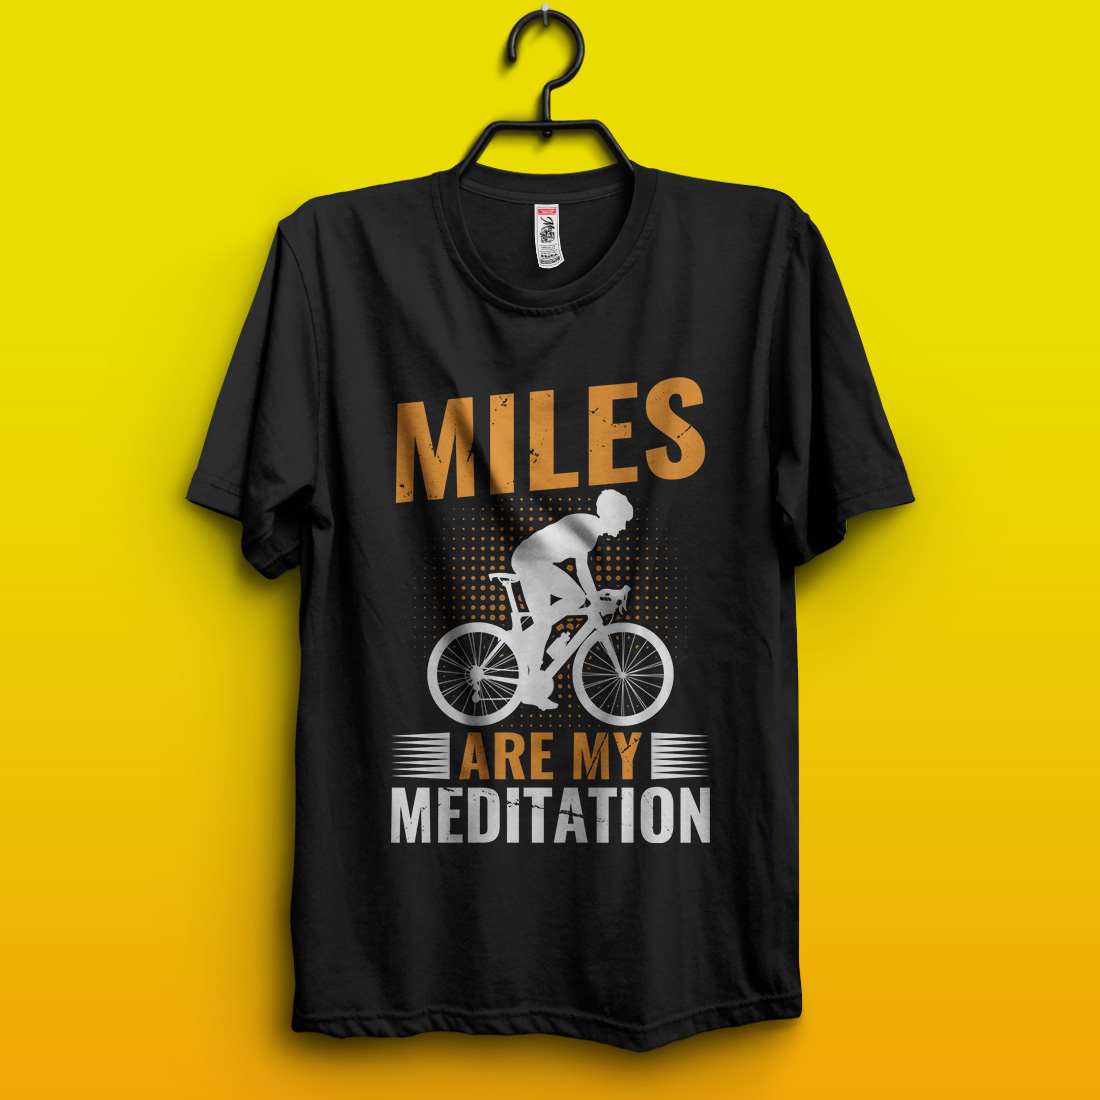 Miles are my meditation – Cycling quotes t-shirt design for adventure lovers pinterest preview image.